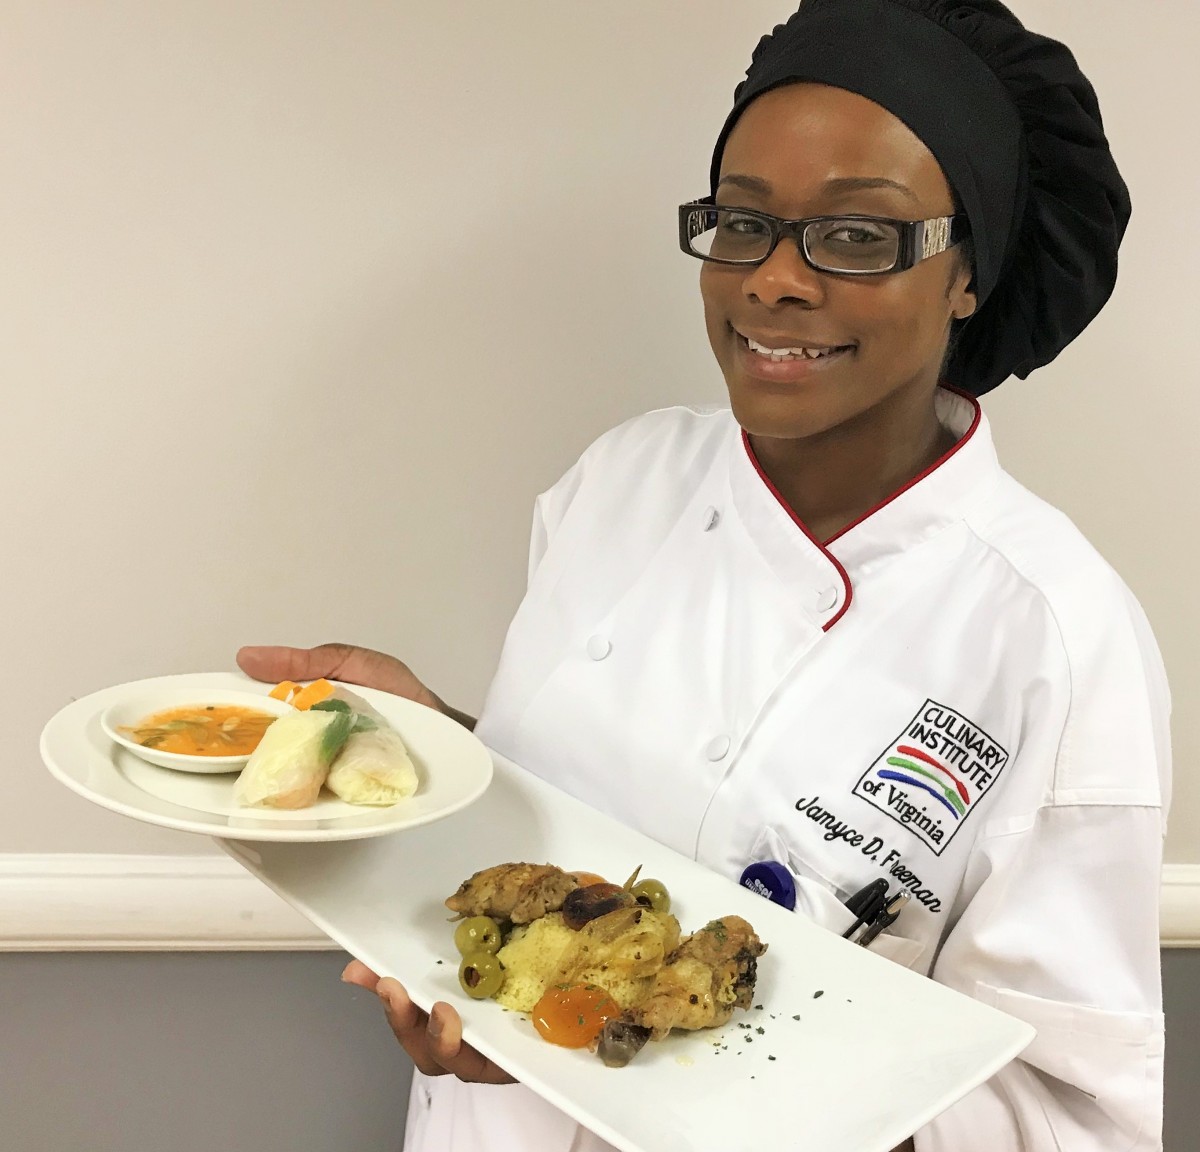 Culinary Competition at CIV Honors Memory of Local Woman